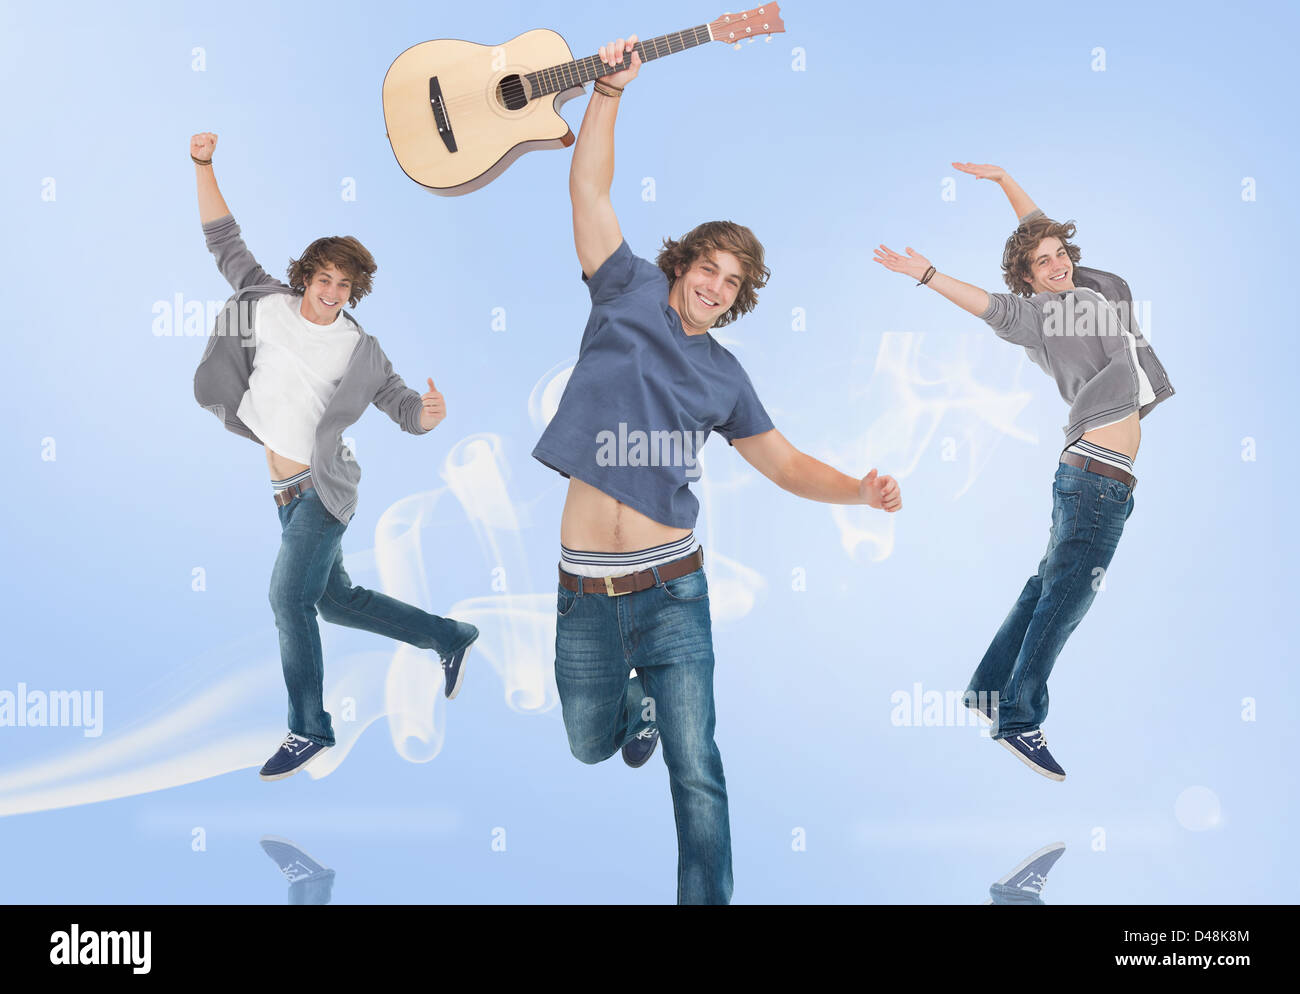 Three of the same teenage boy jumping for joy one holding a guitar Stock Photo